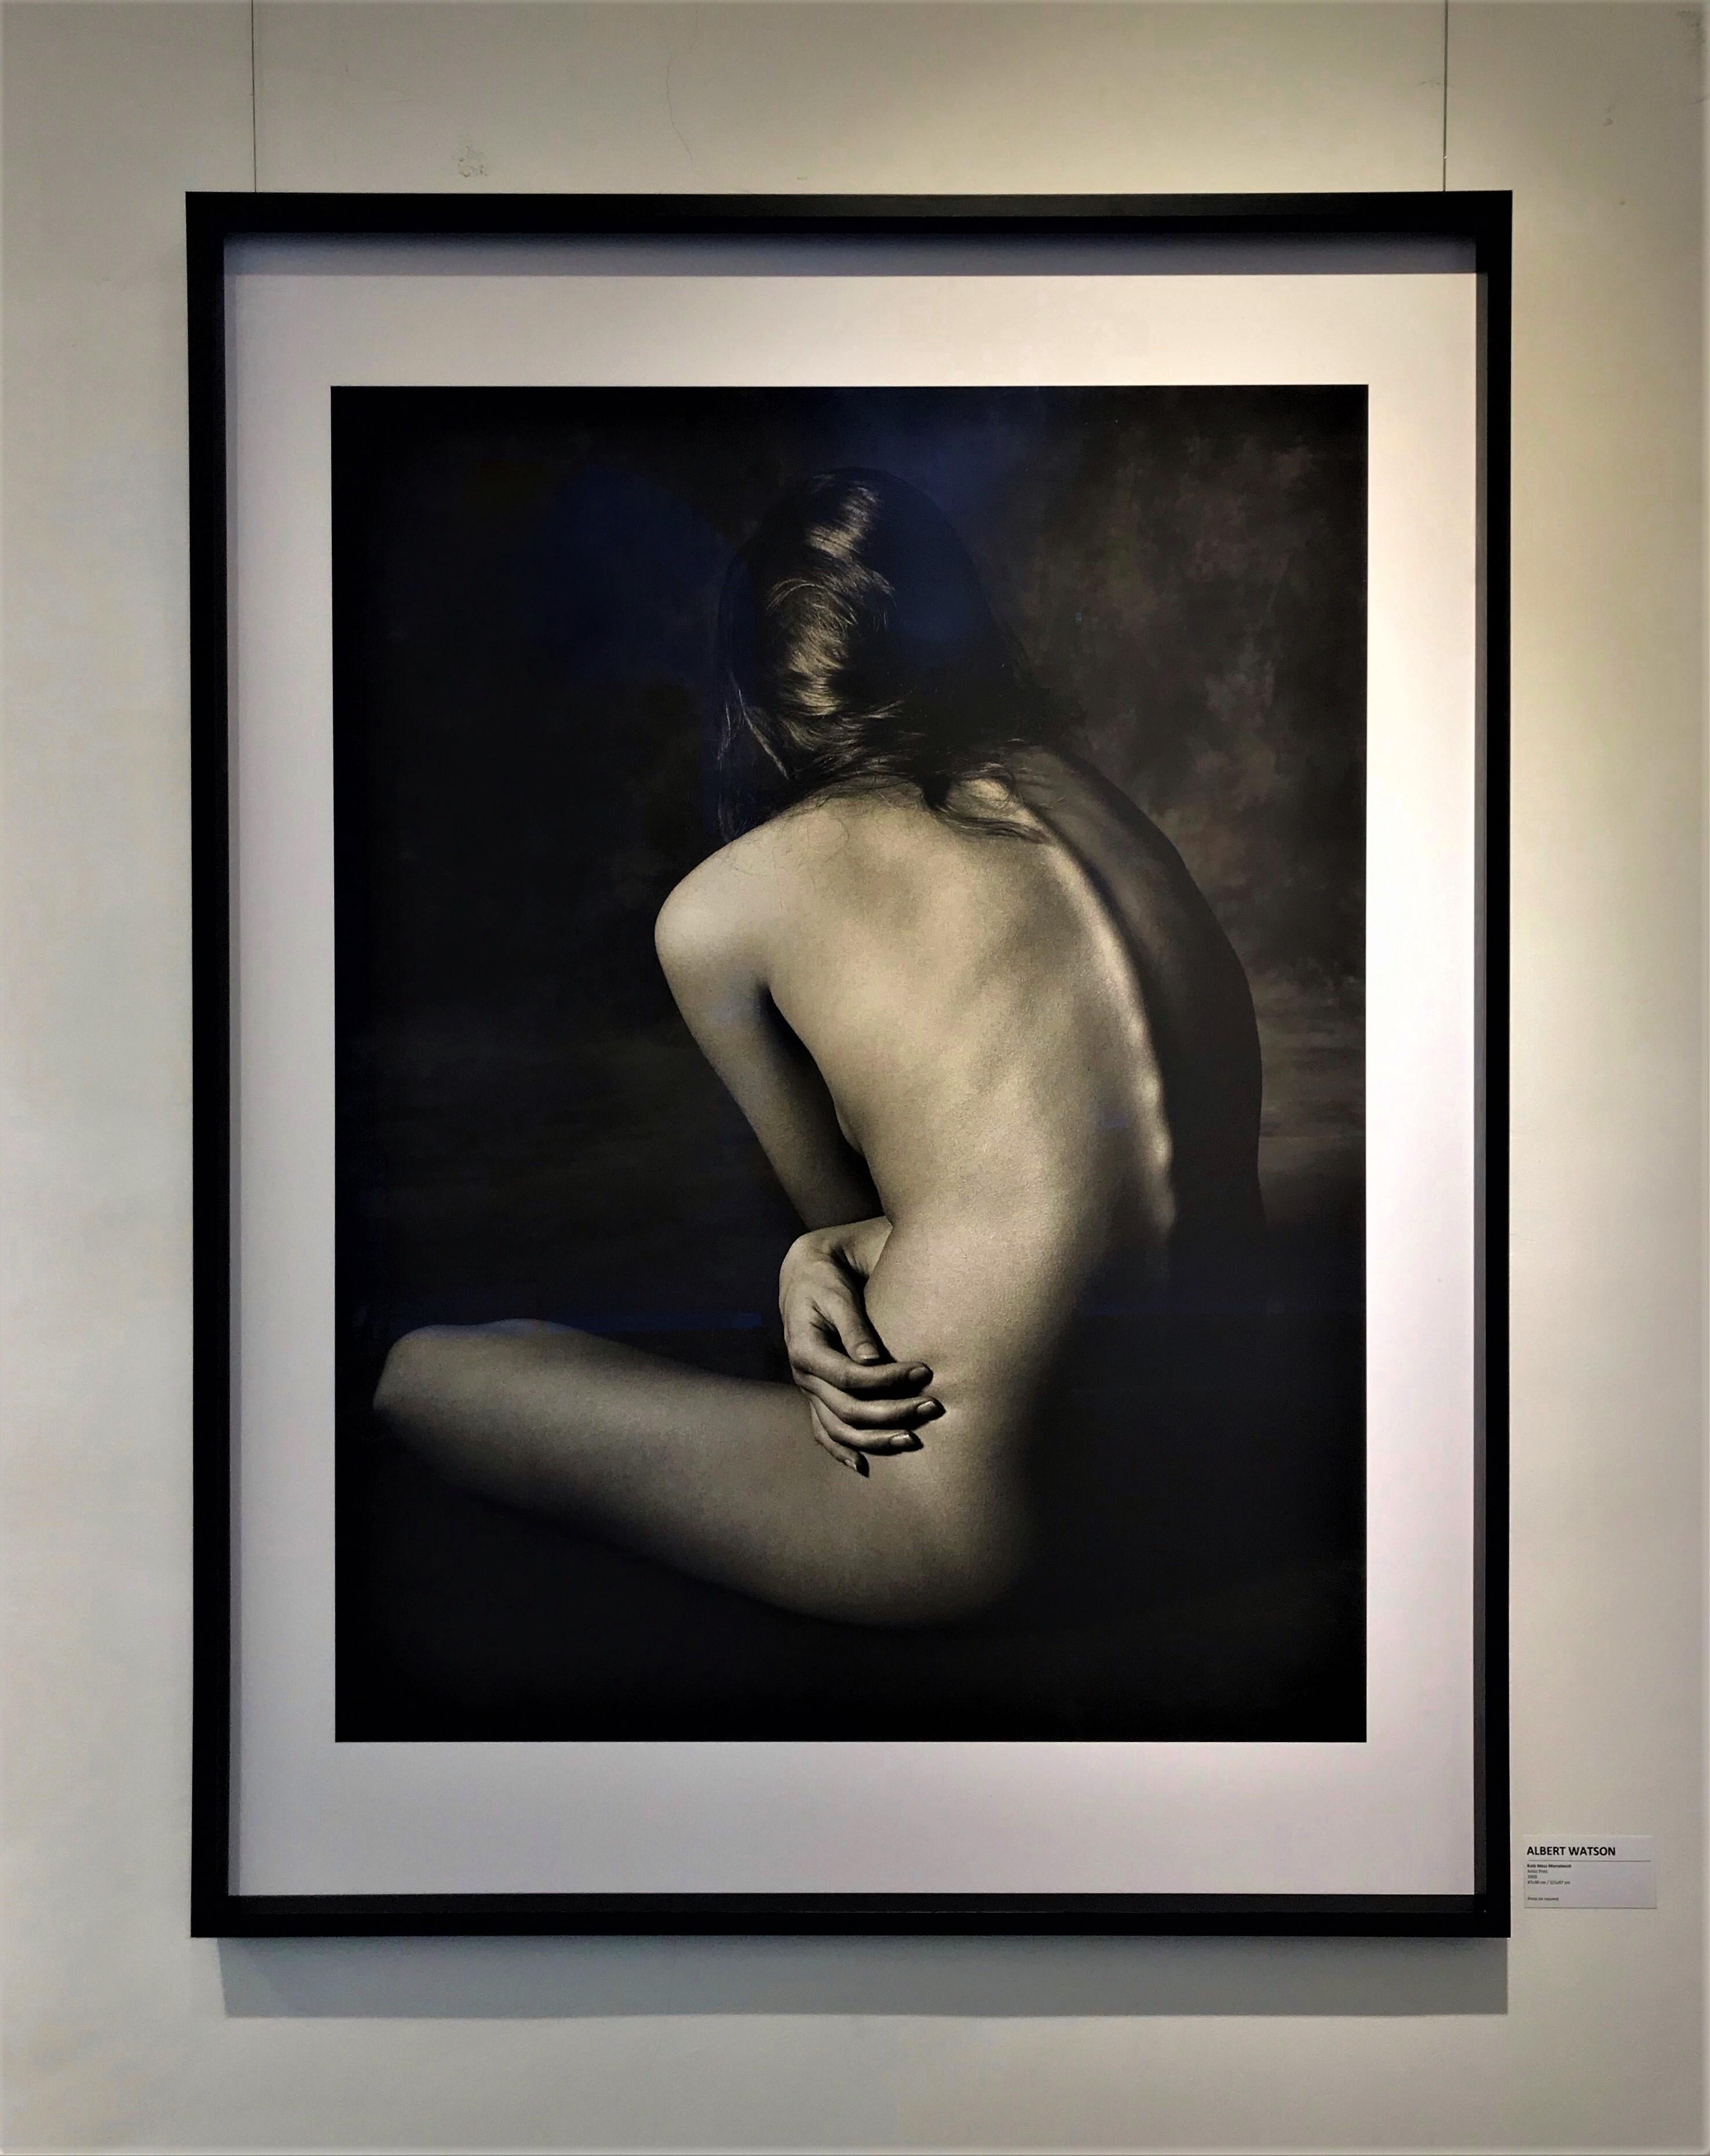 Kate Moss Back, Marrakech - nude portrait of the supermodel and fashion icon - Photograph by Albert Watson